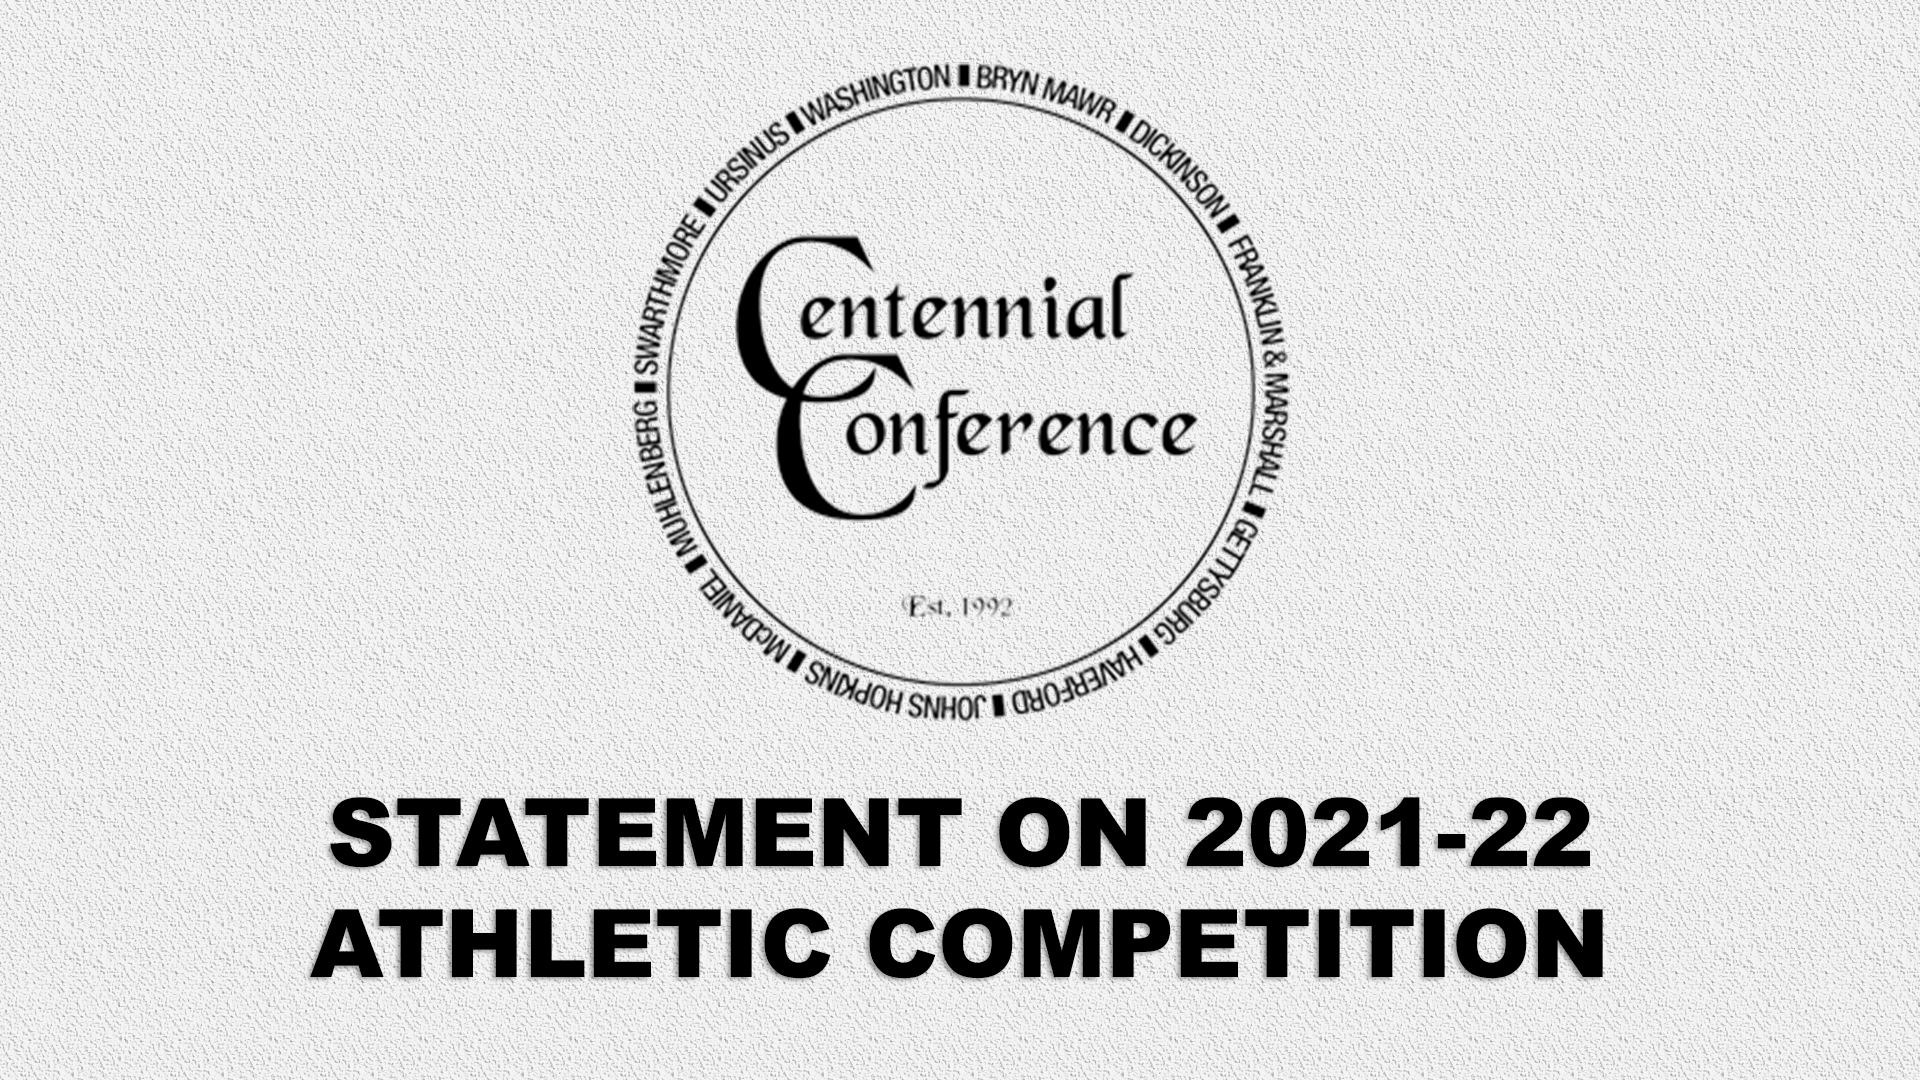 Centennial Conference Statement on 2021-22 Athletic Competition